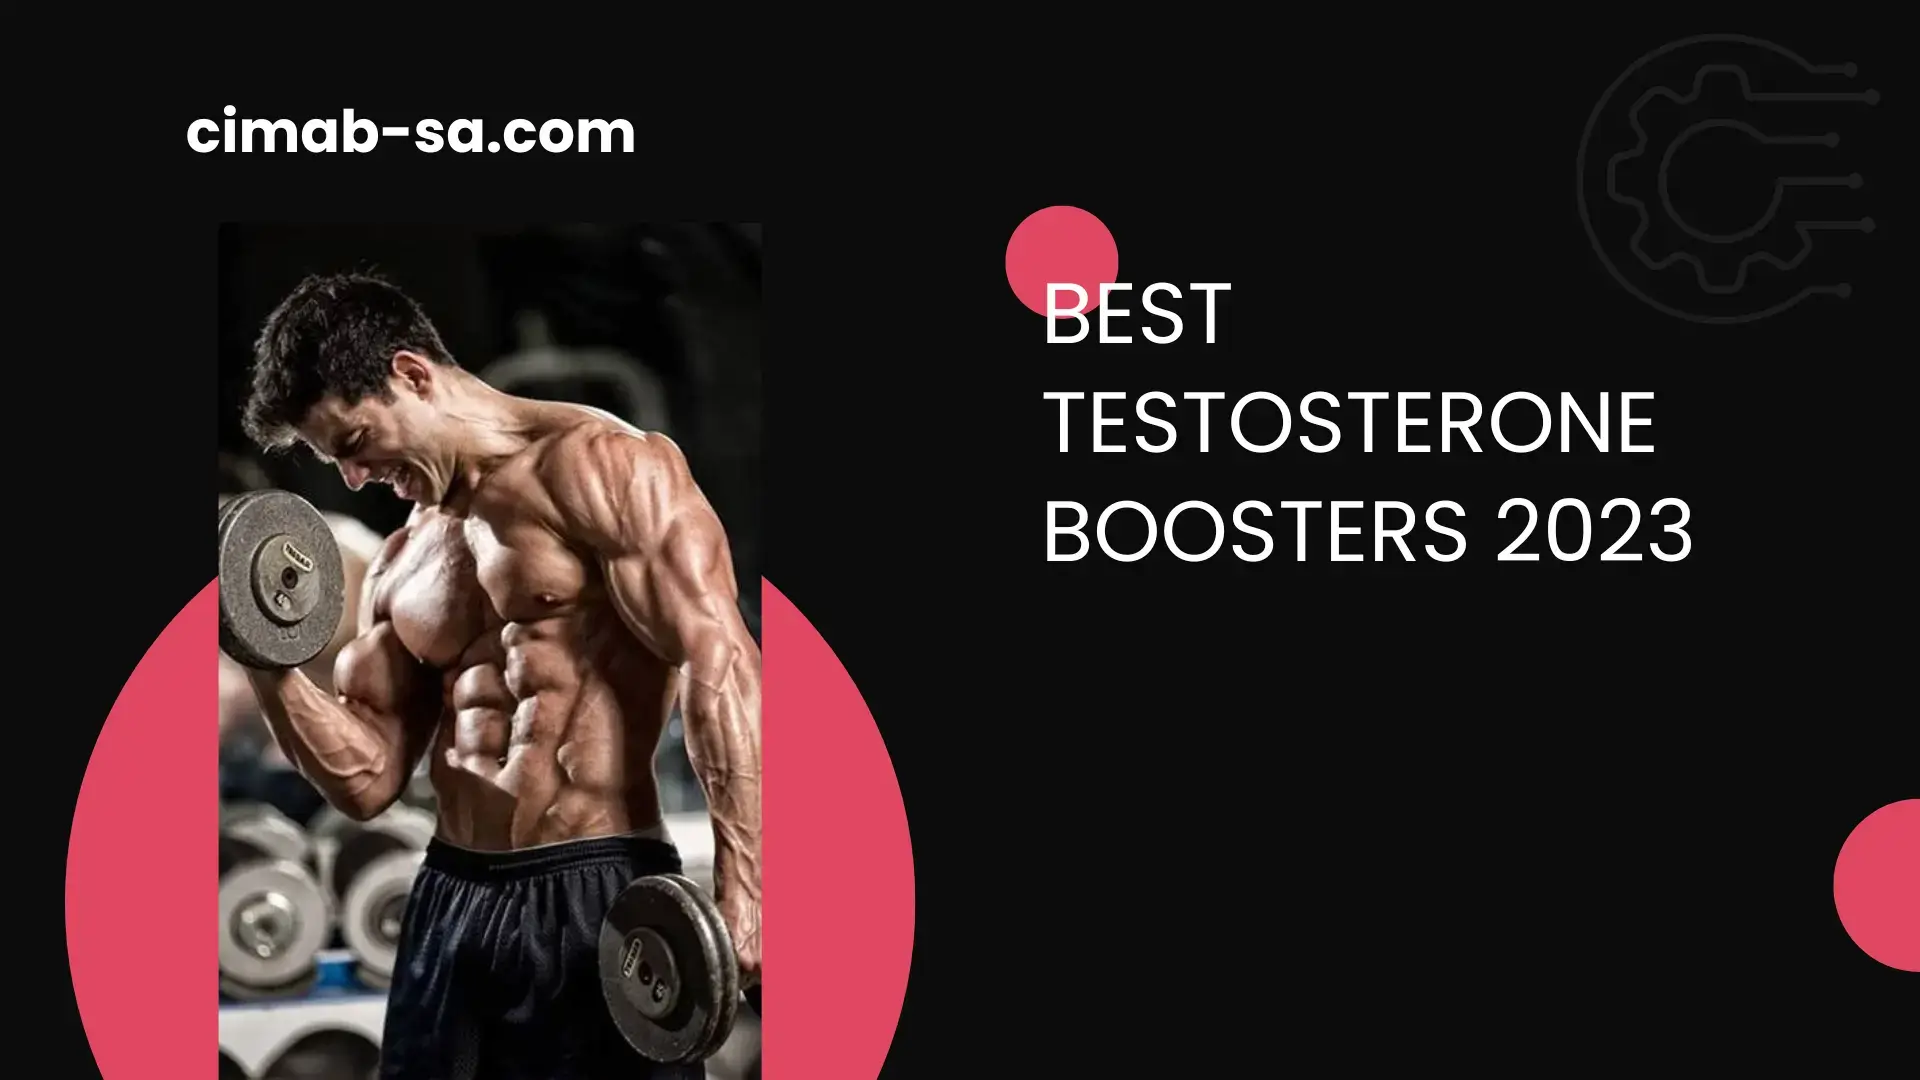 Best Testosterone Booster 2023 Test Boosters That Really Work!